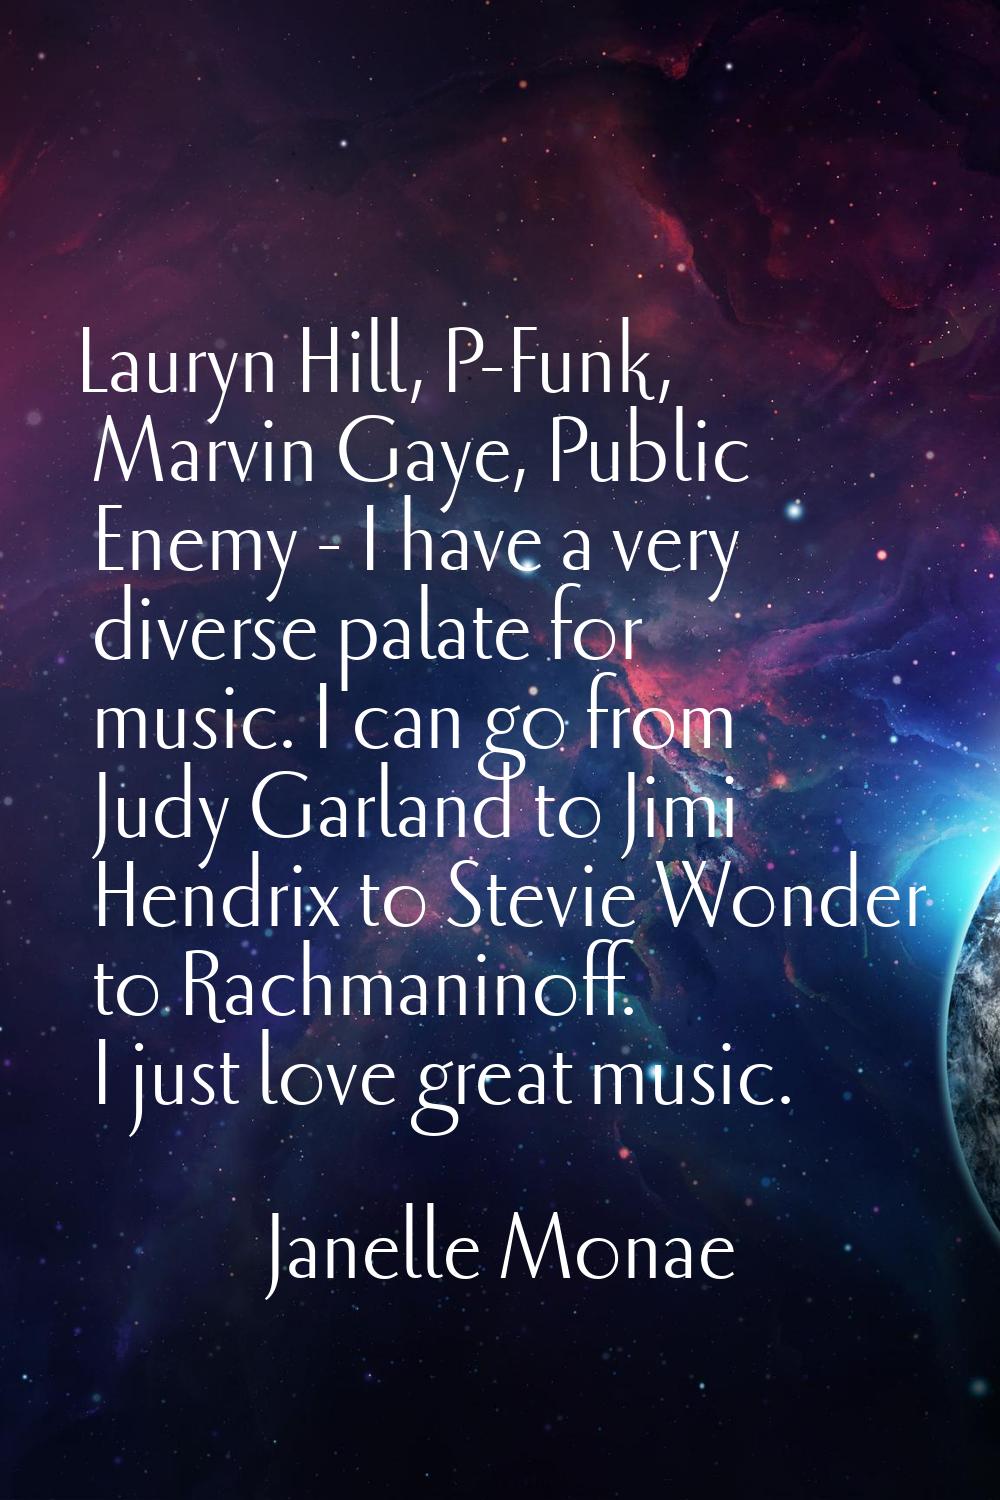 Lauryn Hill, P-Funk, Marvin Gaye, Public Enemy - I have a very diverse palate for music. I can go f